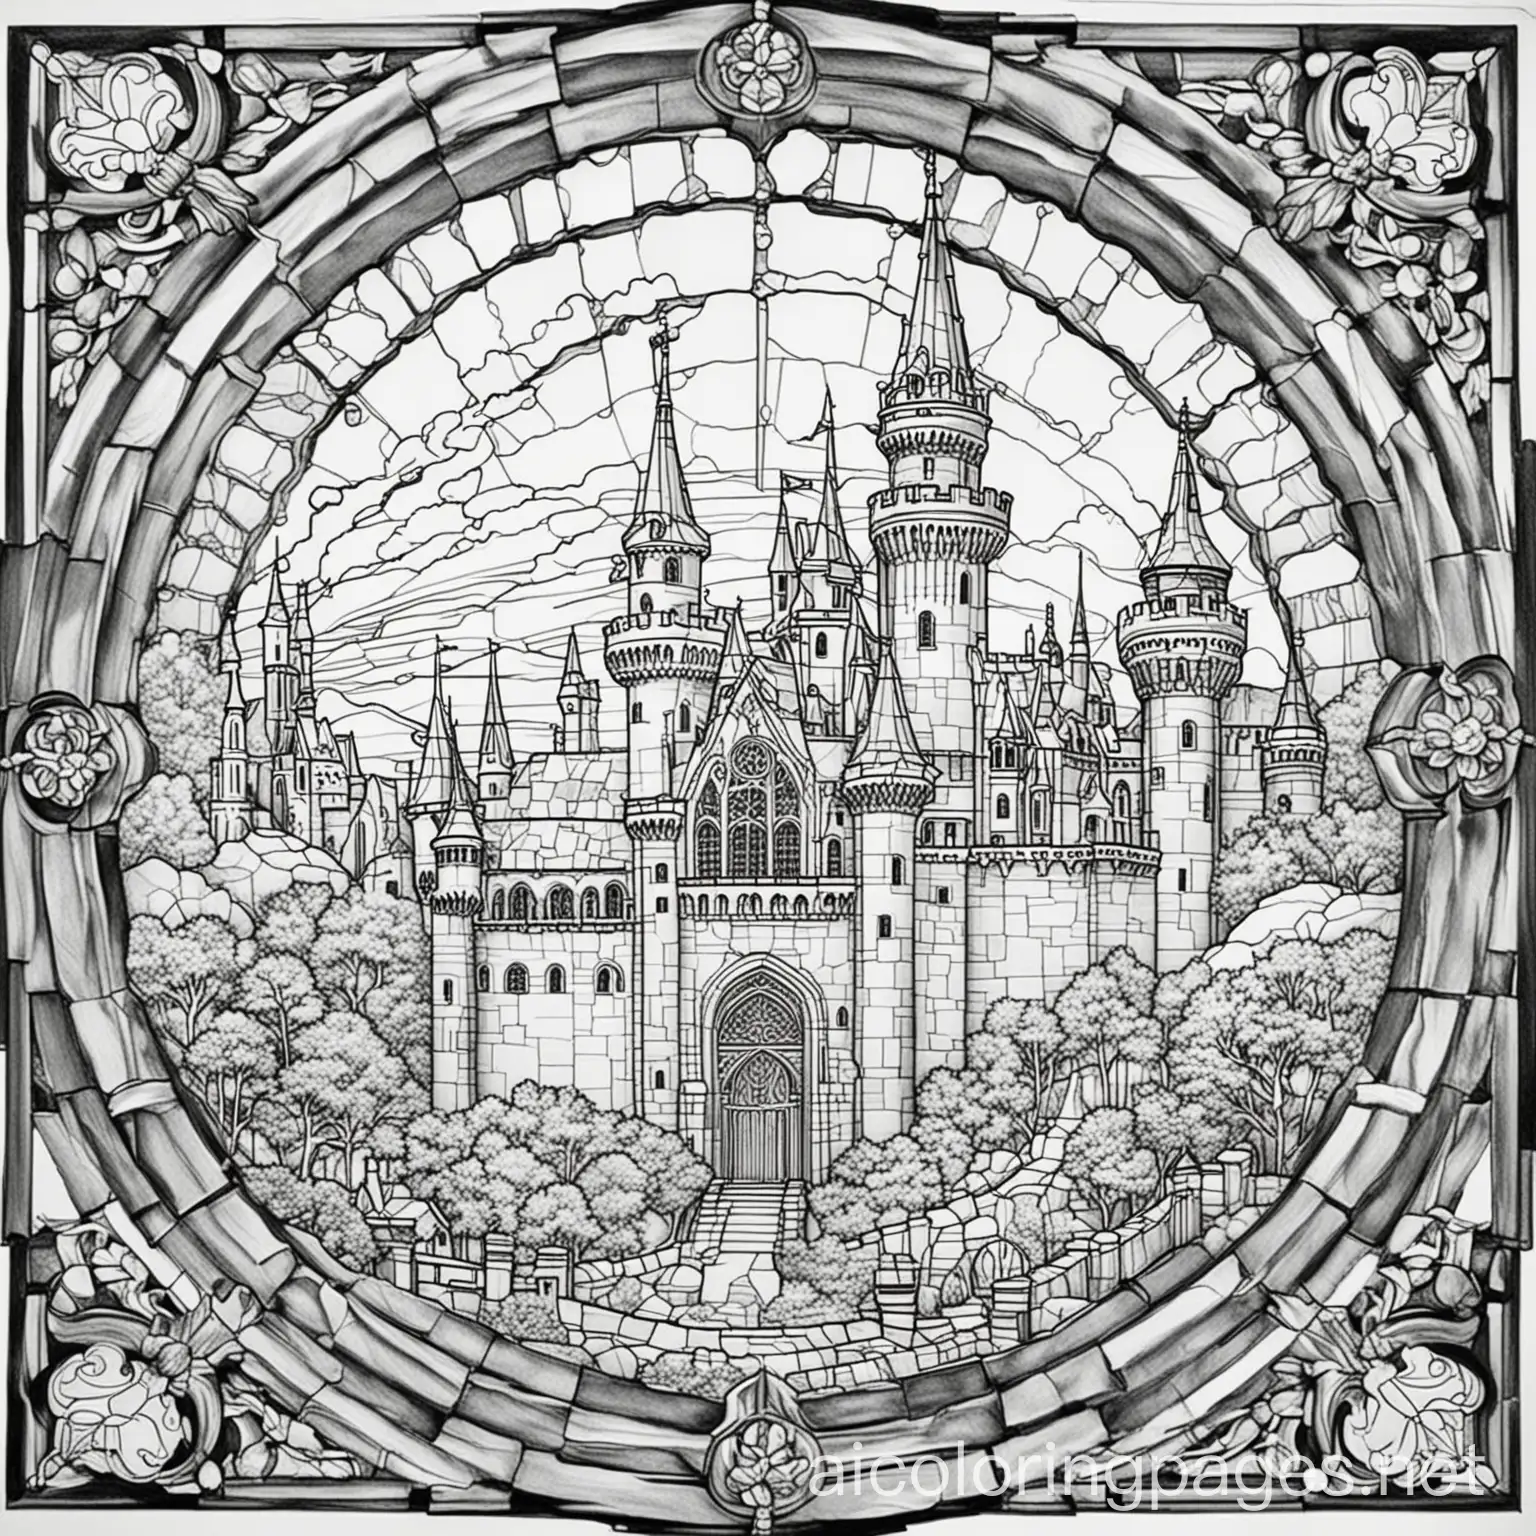 Coloring book page, of a stained glass art piece covering the entire ceiling of castle, Coloring Page, black and white, line art, white background, Simplicity, Ample White Space. The background of the coloring page is plain white to make it easy for young children to color within the lines. The outlines of all the subjects are easy to distinguish, making it simple for kids to color without too much difficulty